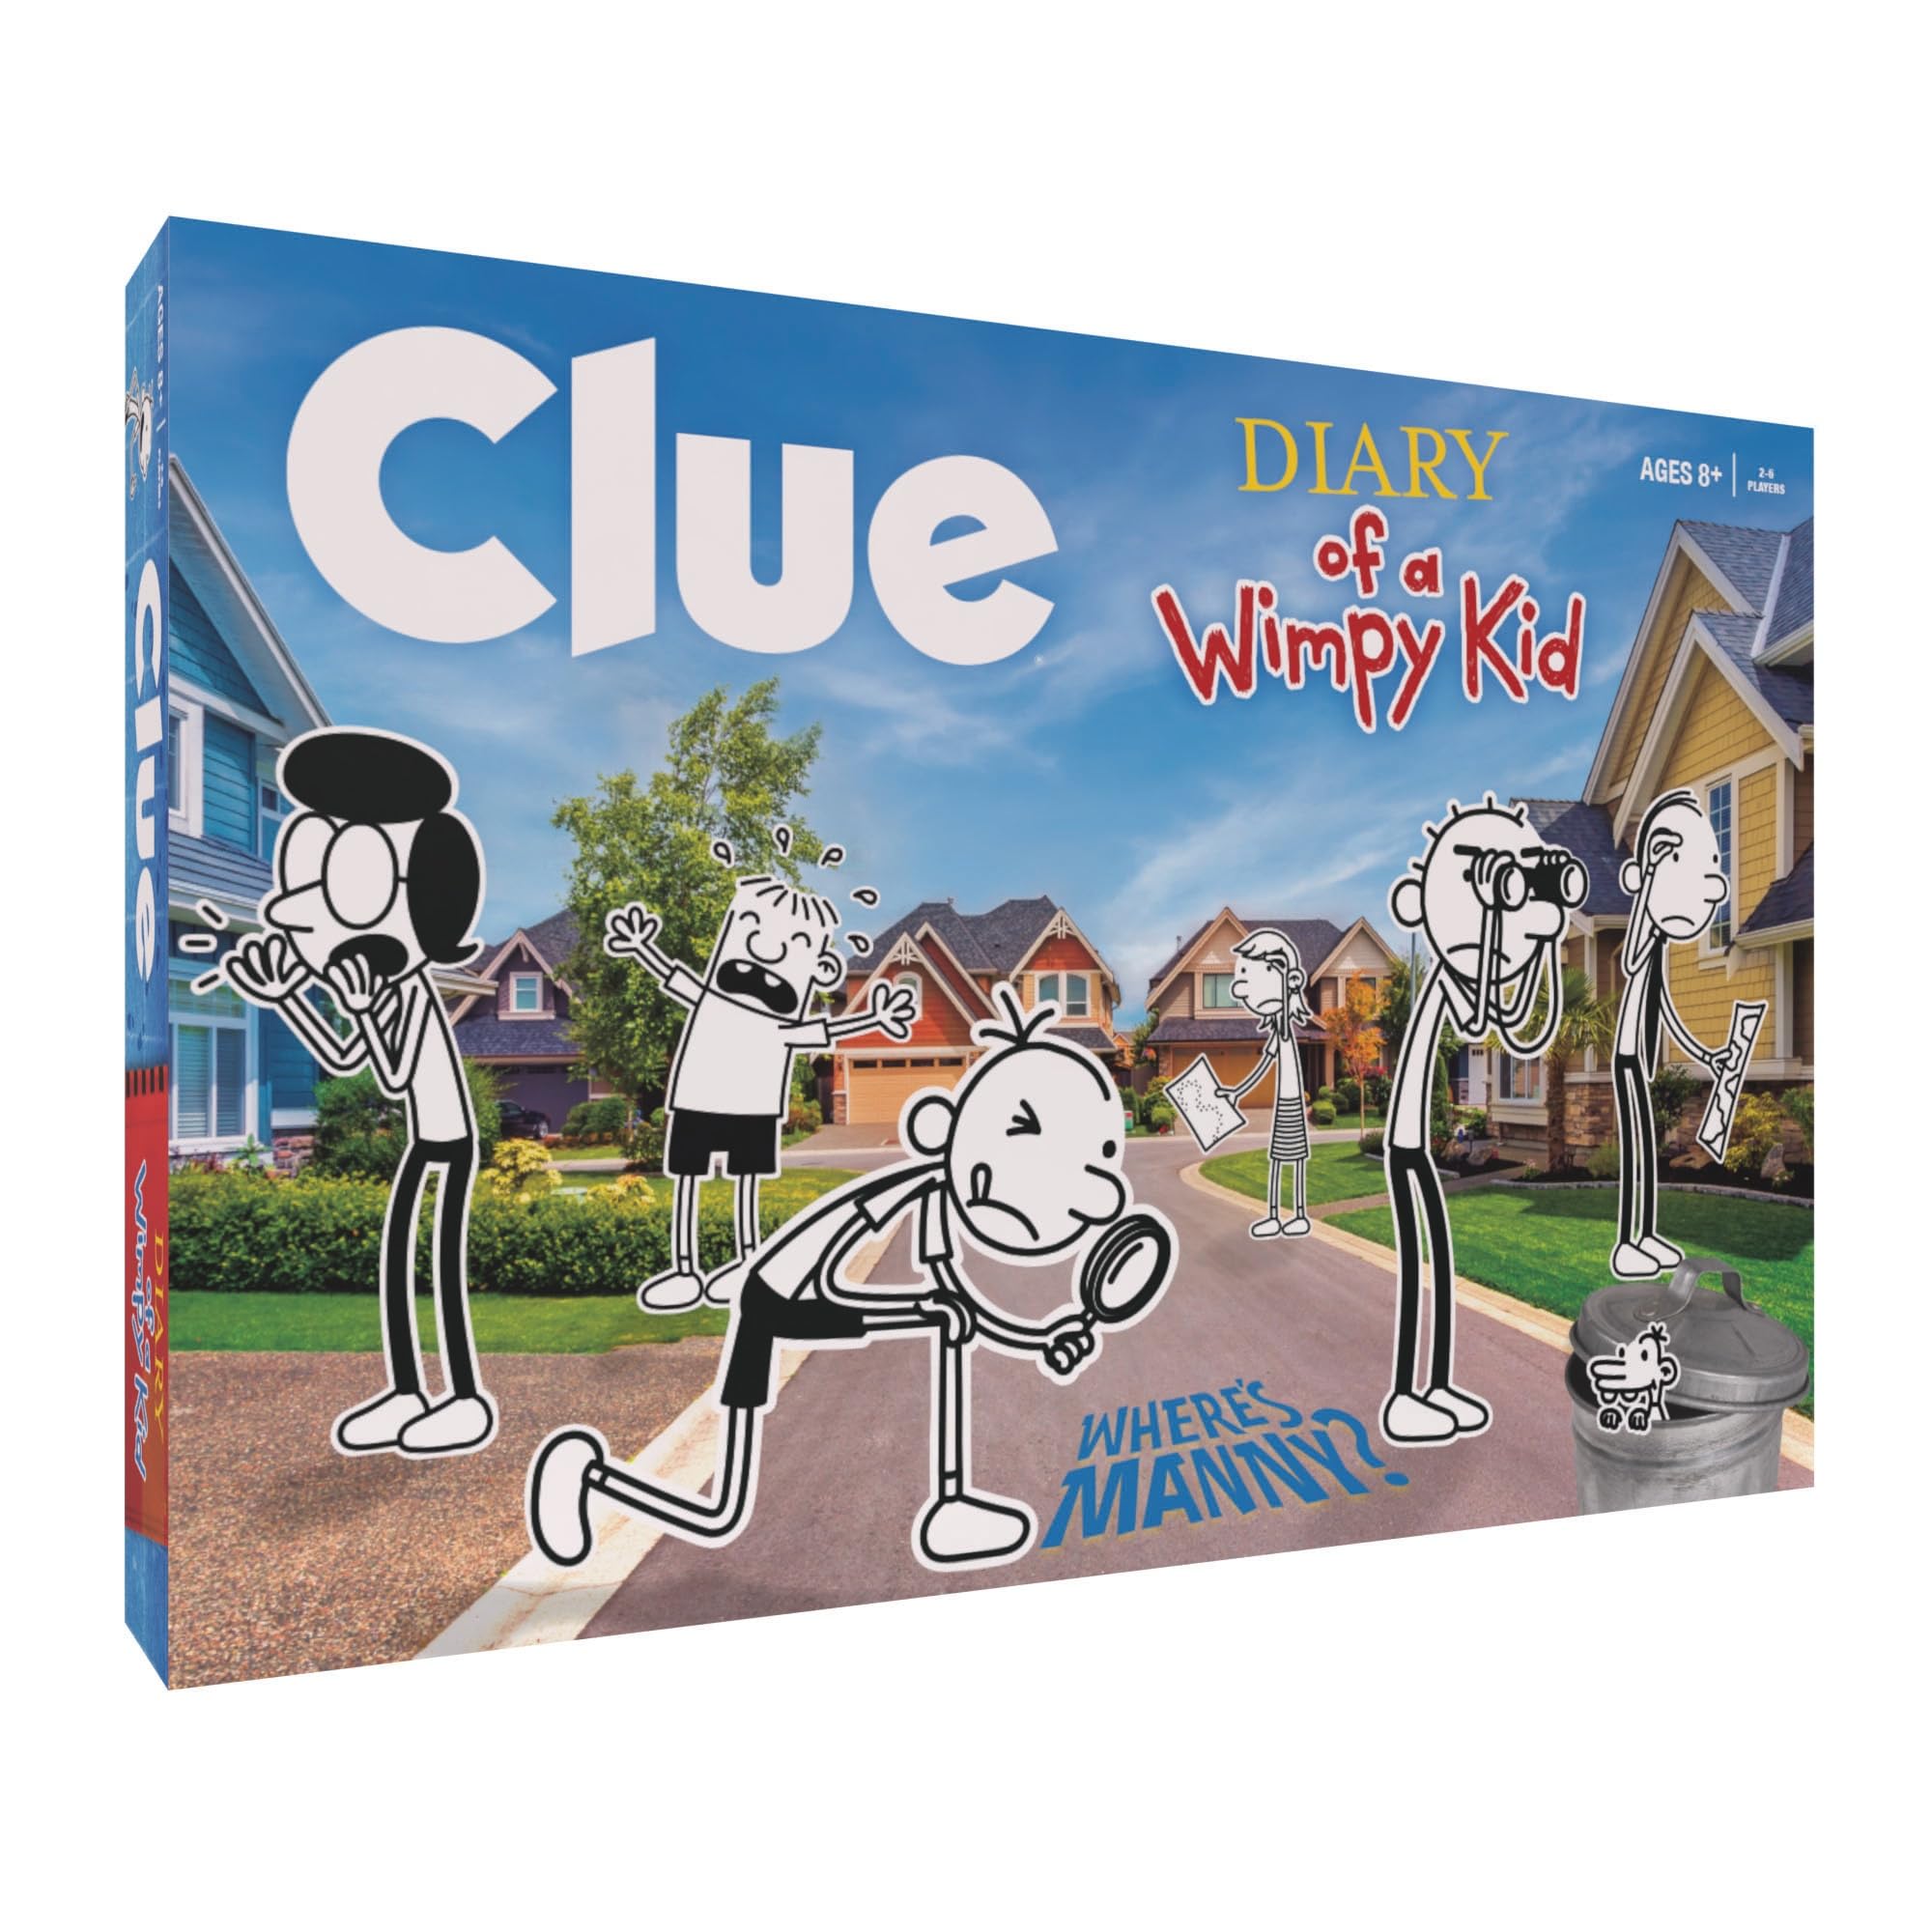 CLUE: Diary of a Wimpy Kid | Solve the Mystery in This Collectible Clue Game Featuring Characters & Locations from the Popular Book Series Diary of a Wimpy Kid | Officially-Licensed Diary of a Wimpy